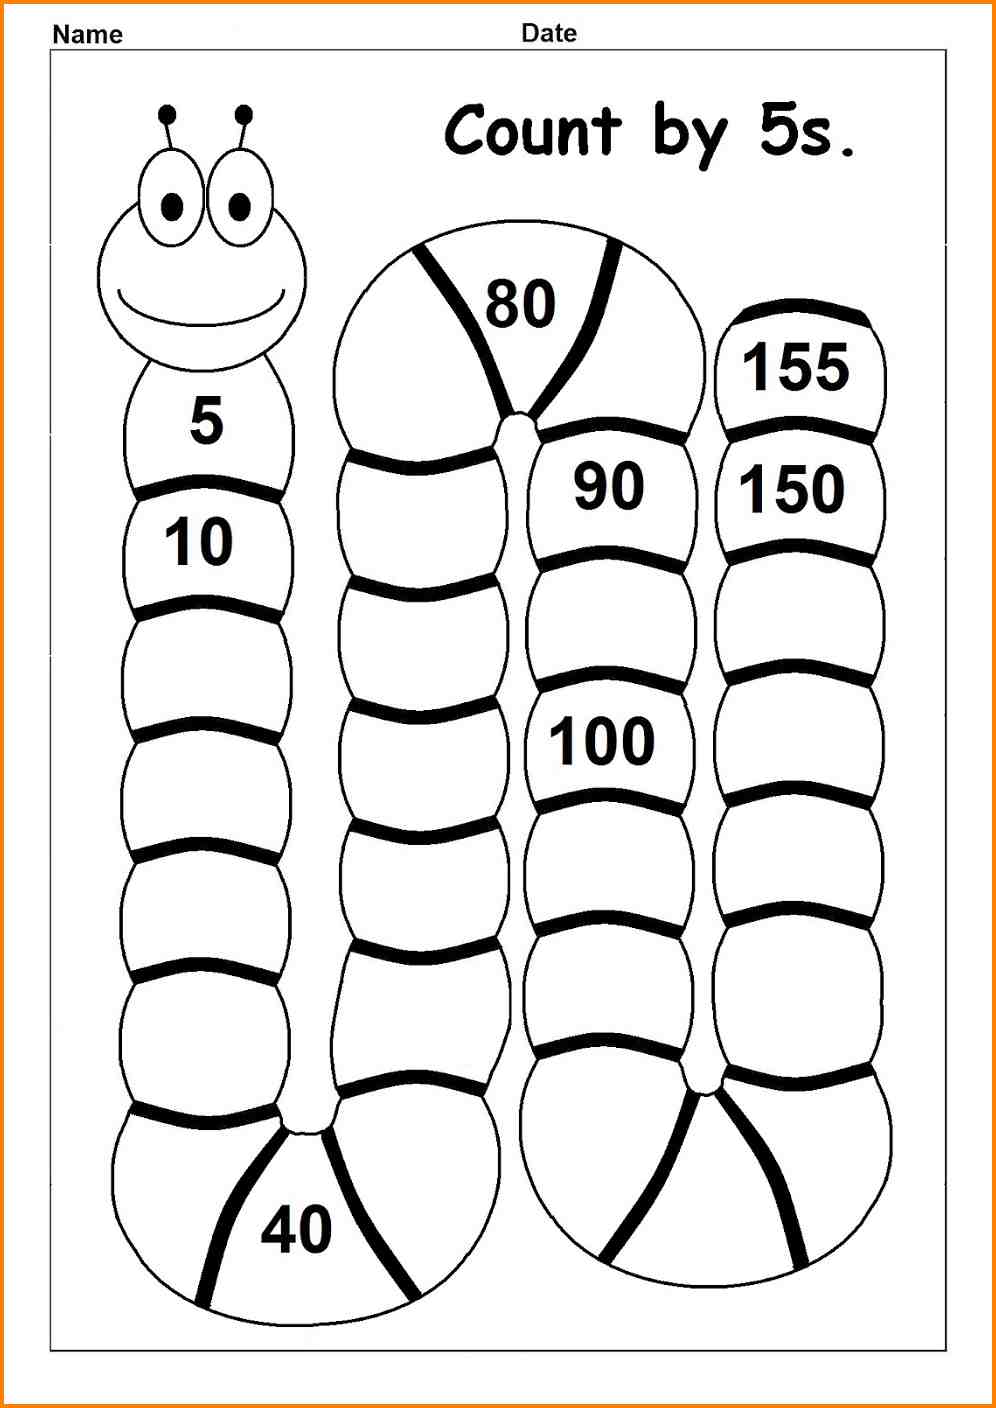 Counting By 5s Worksheet Gallery